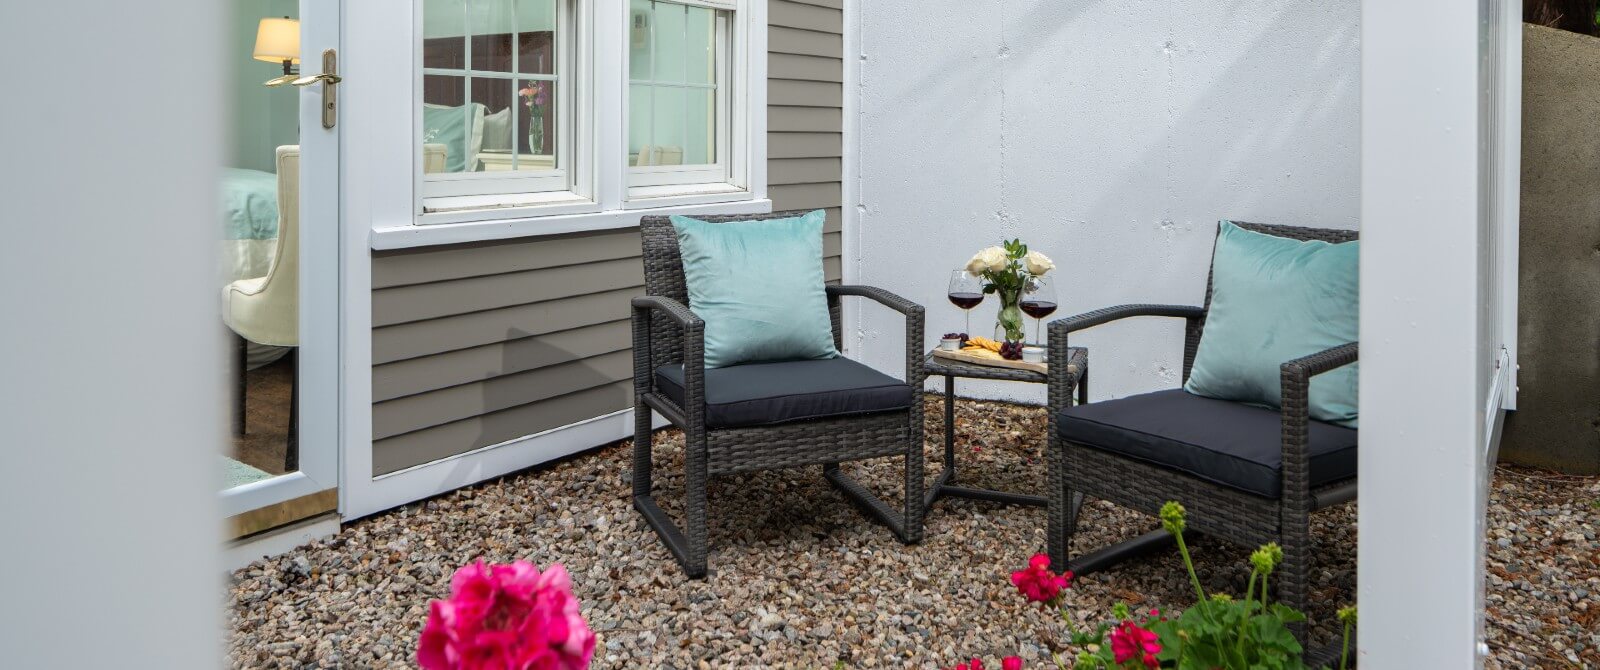 Outdoor patio outside of a bedroom with two chairs and table with wine glasses and vase of flowers